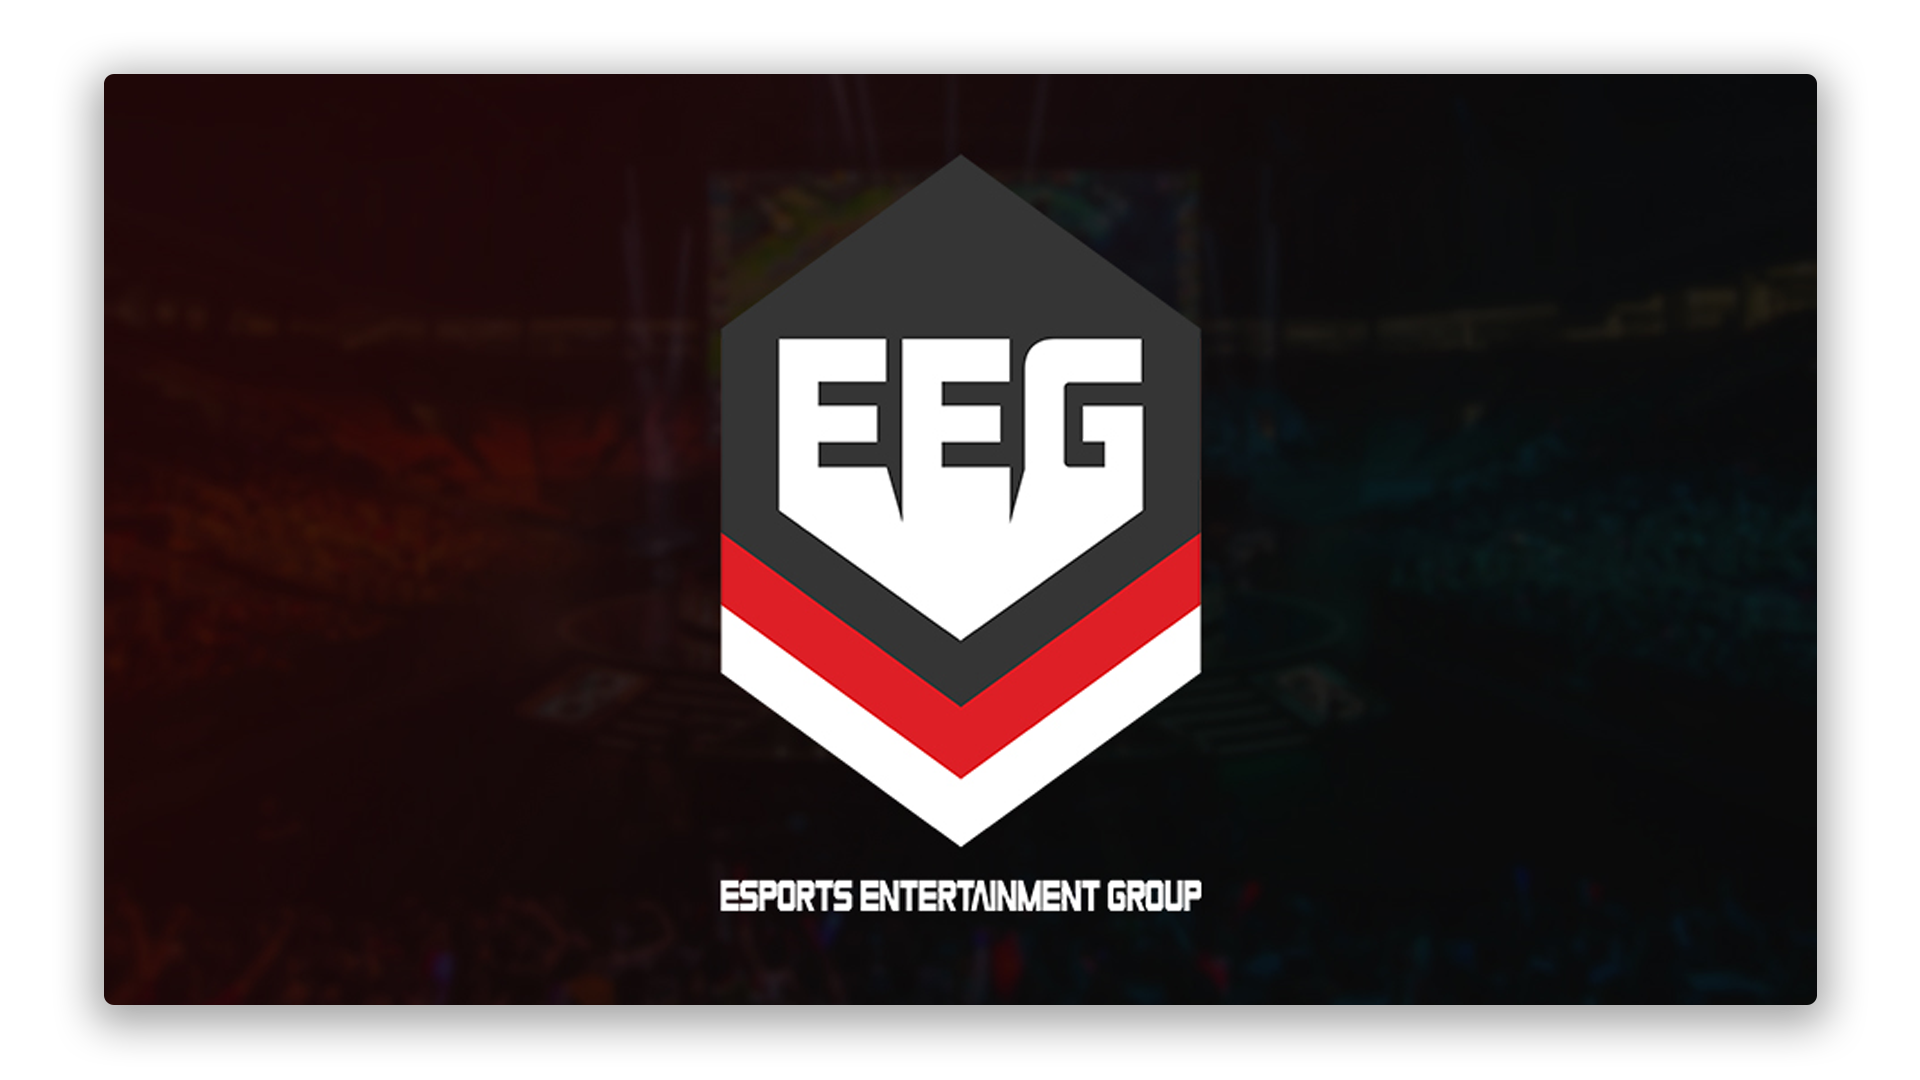 Esports Entertainment Group with dramatic loss of value